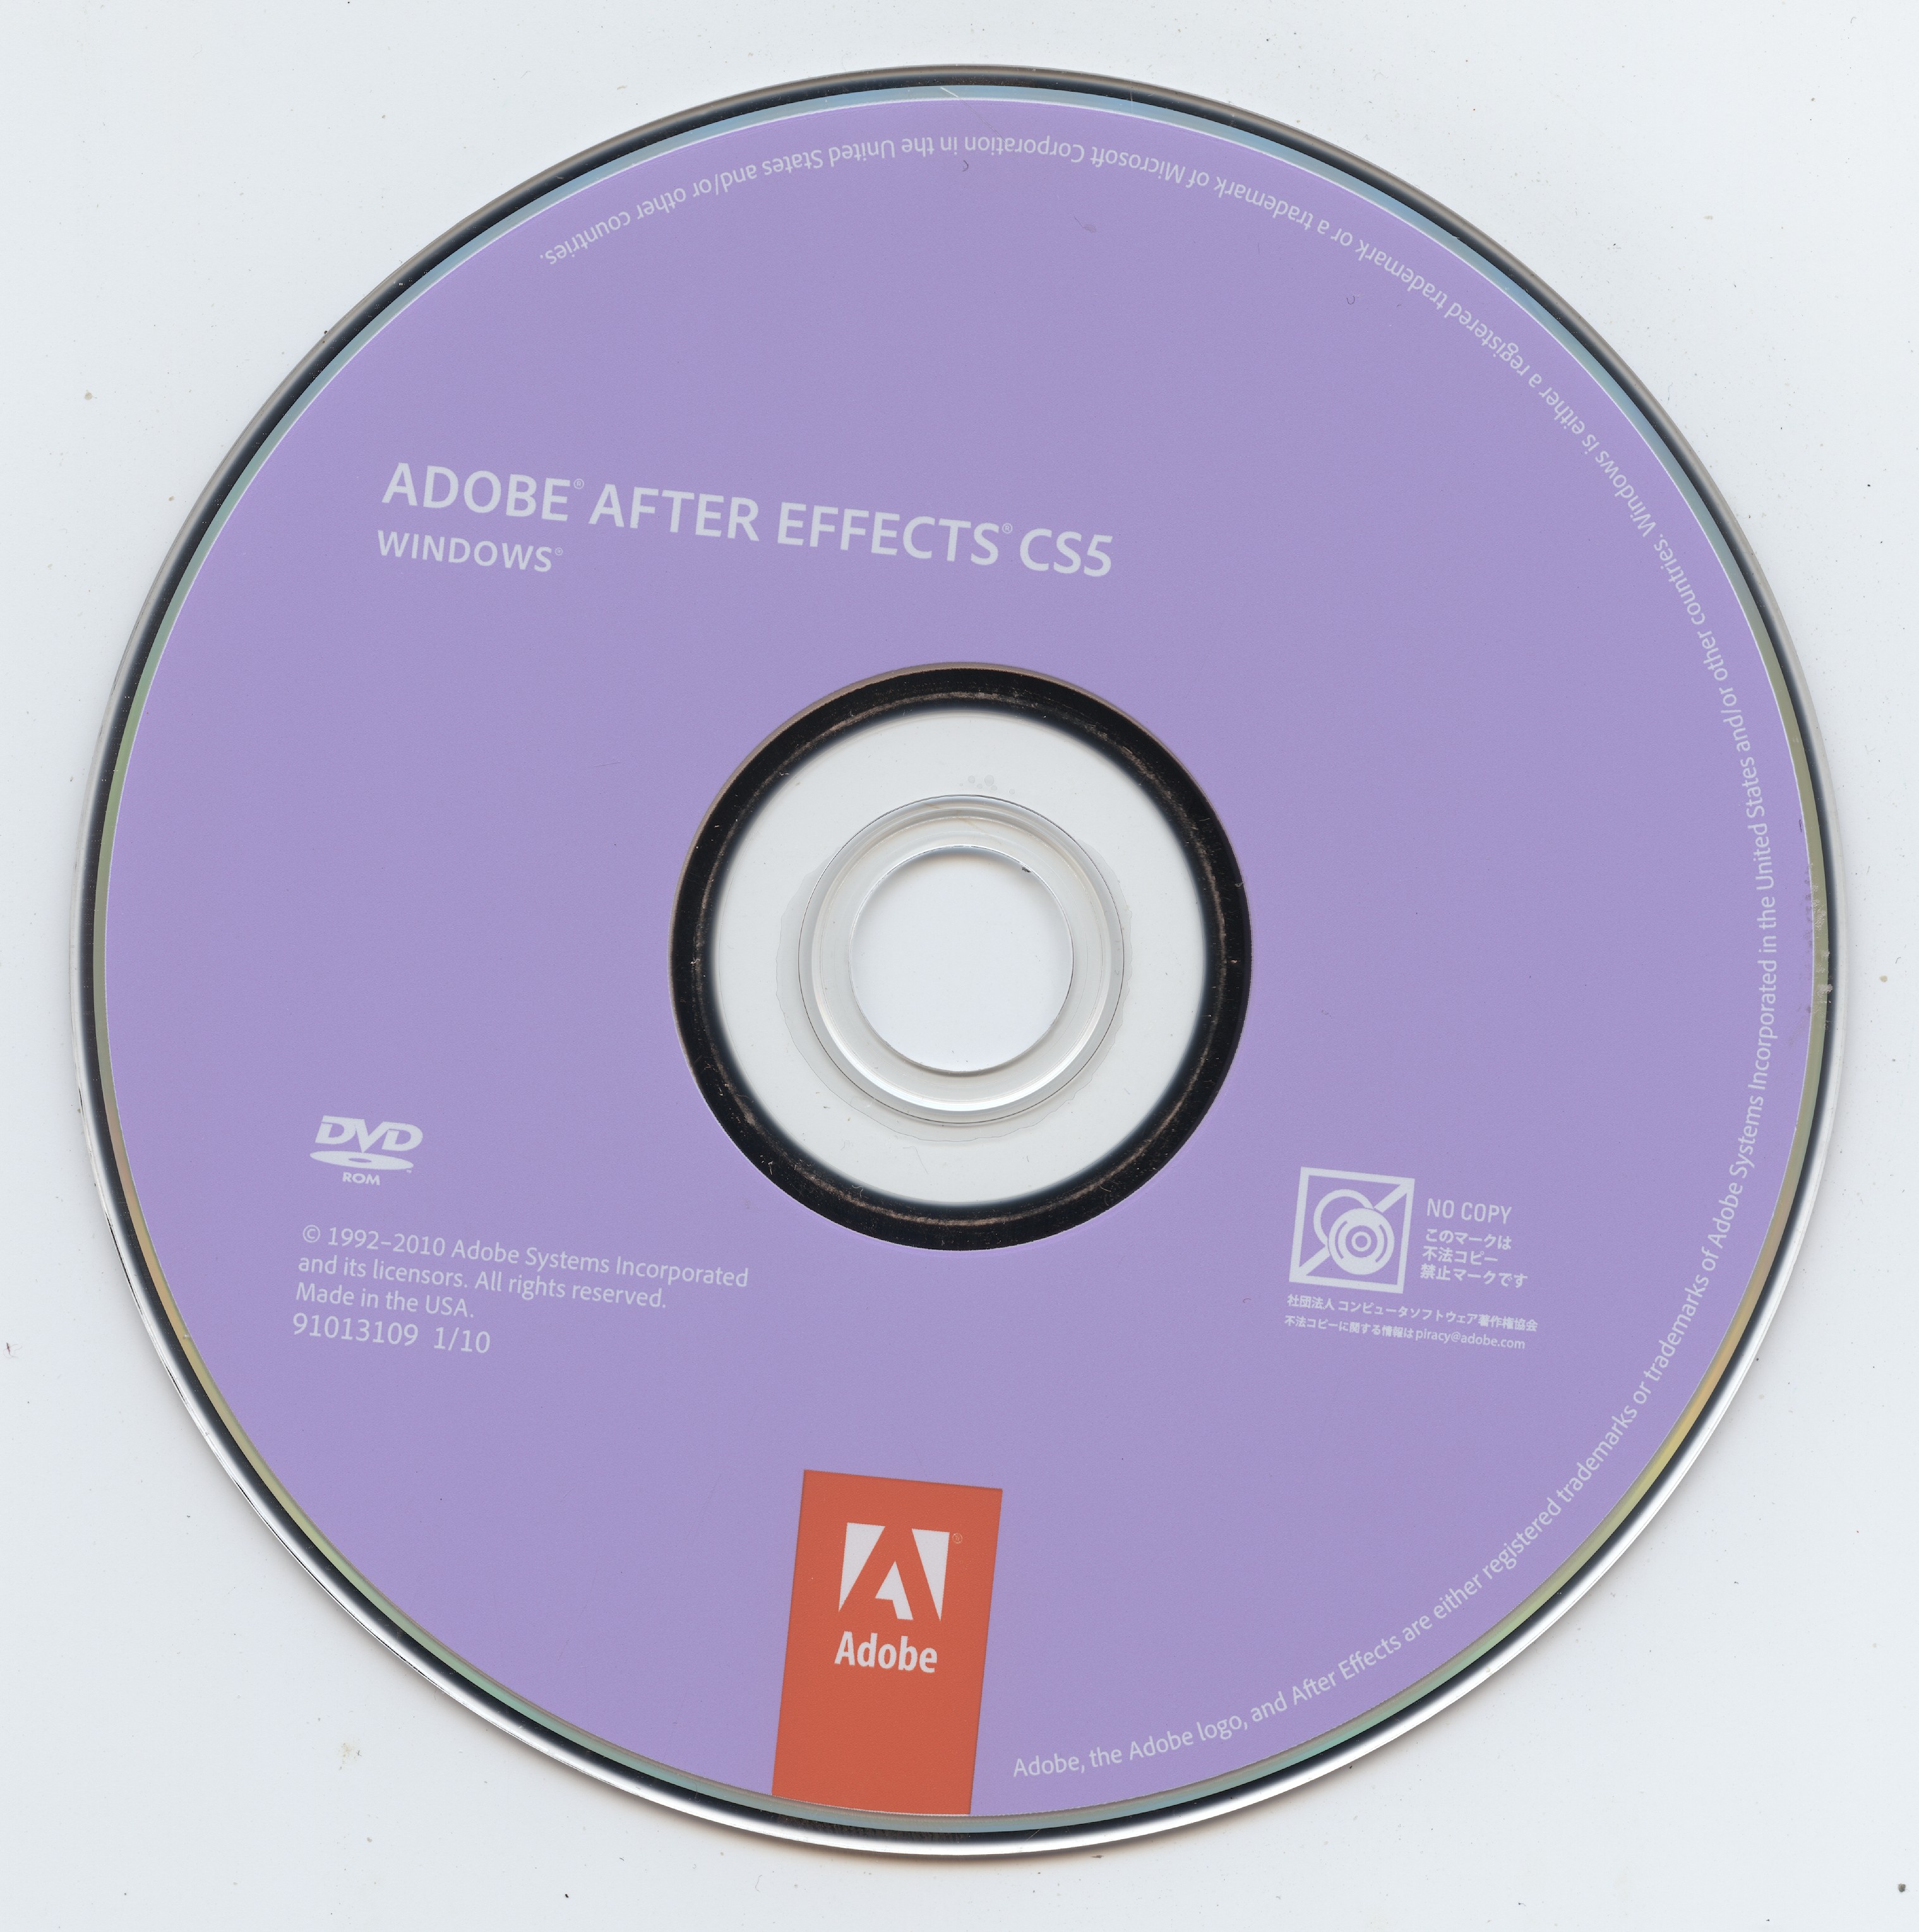 Download adobe after effects cs5 full crack how to download python for windows